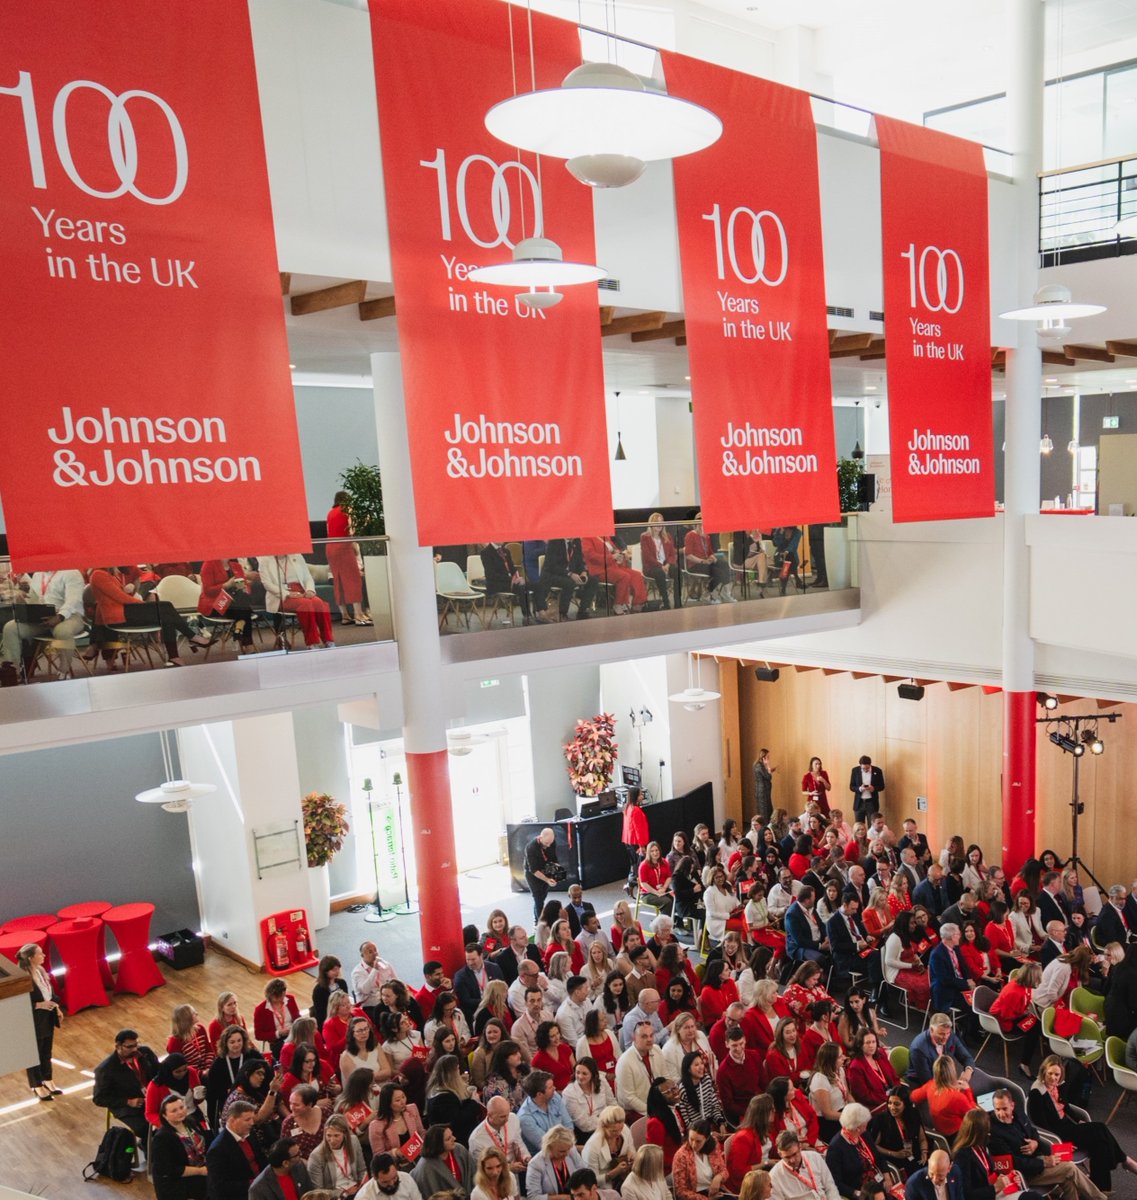 🥳Yesterday, we celebrated 100 years of J&J in the UK with our CEO, Joaquin Duato and over 3,000 colleagues. It was a privilege celebrating our heritage with so many purpose-driven teams, all of whom work tirelessly reimagining what’s possible in healthcare to drive better